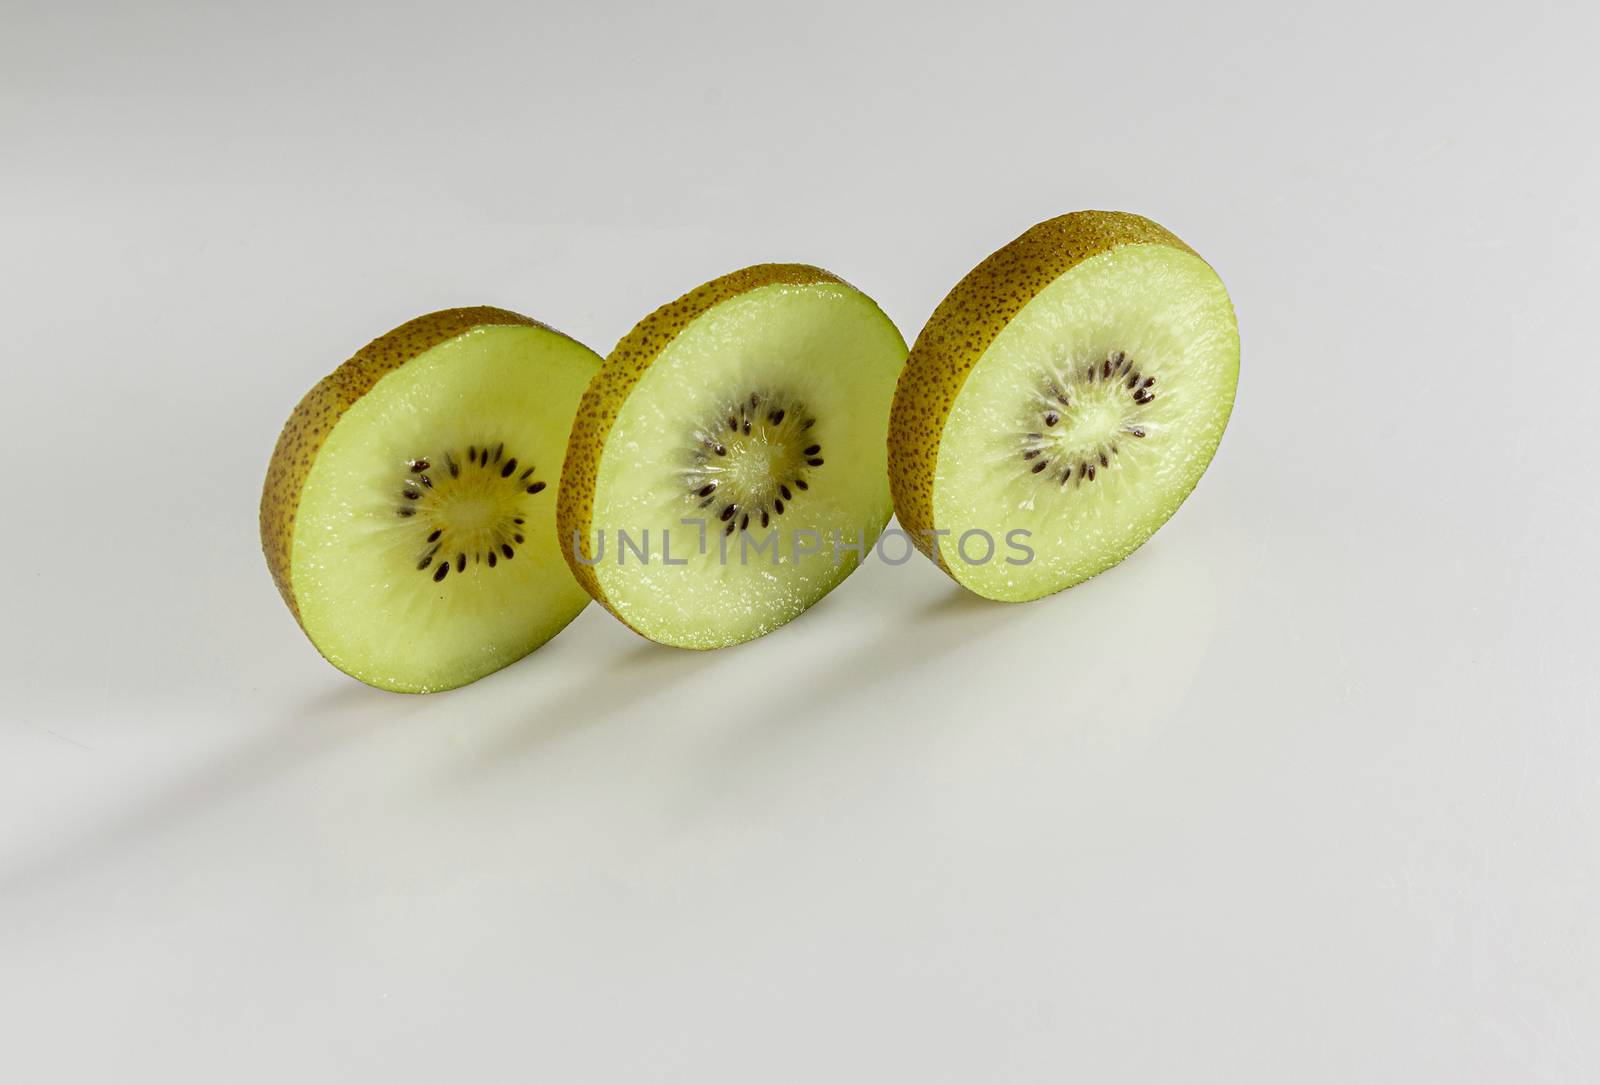 Kiwi sliced in three layers stand against a white background by ben44